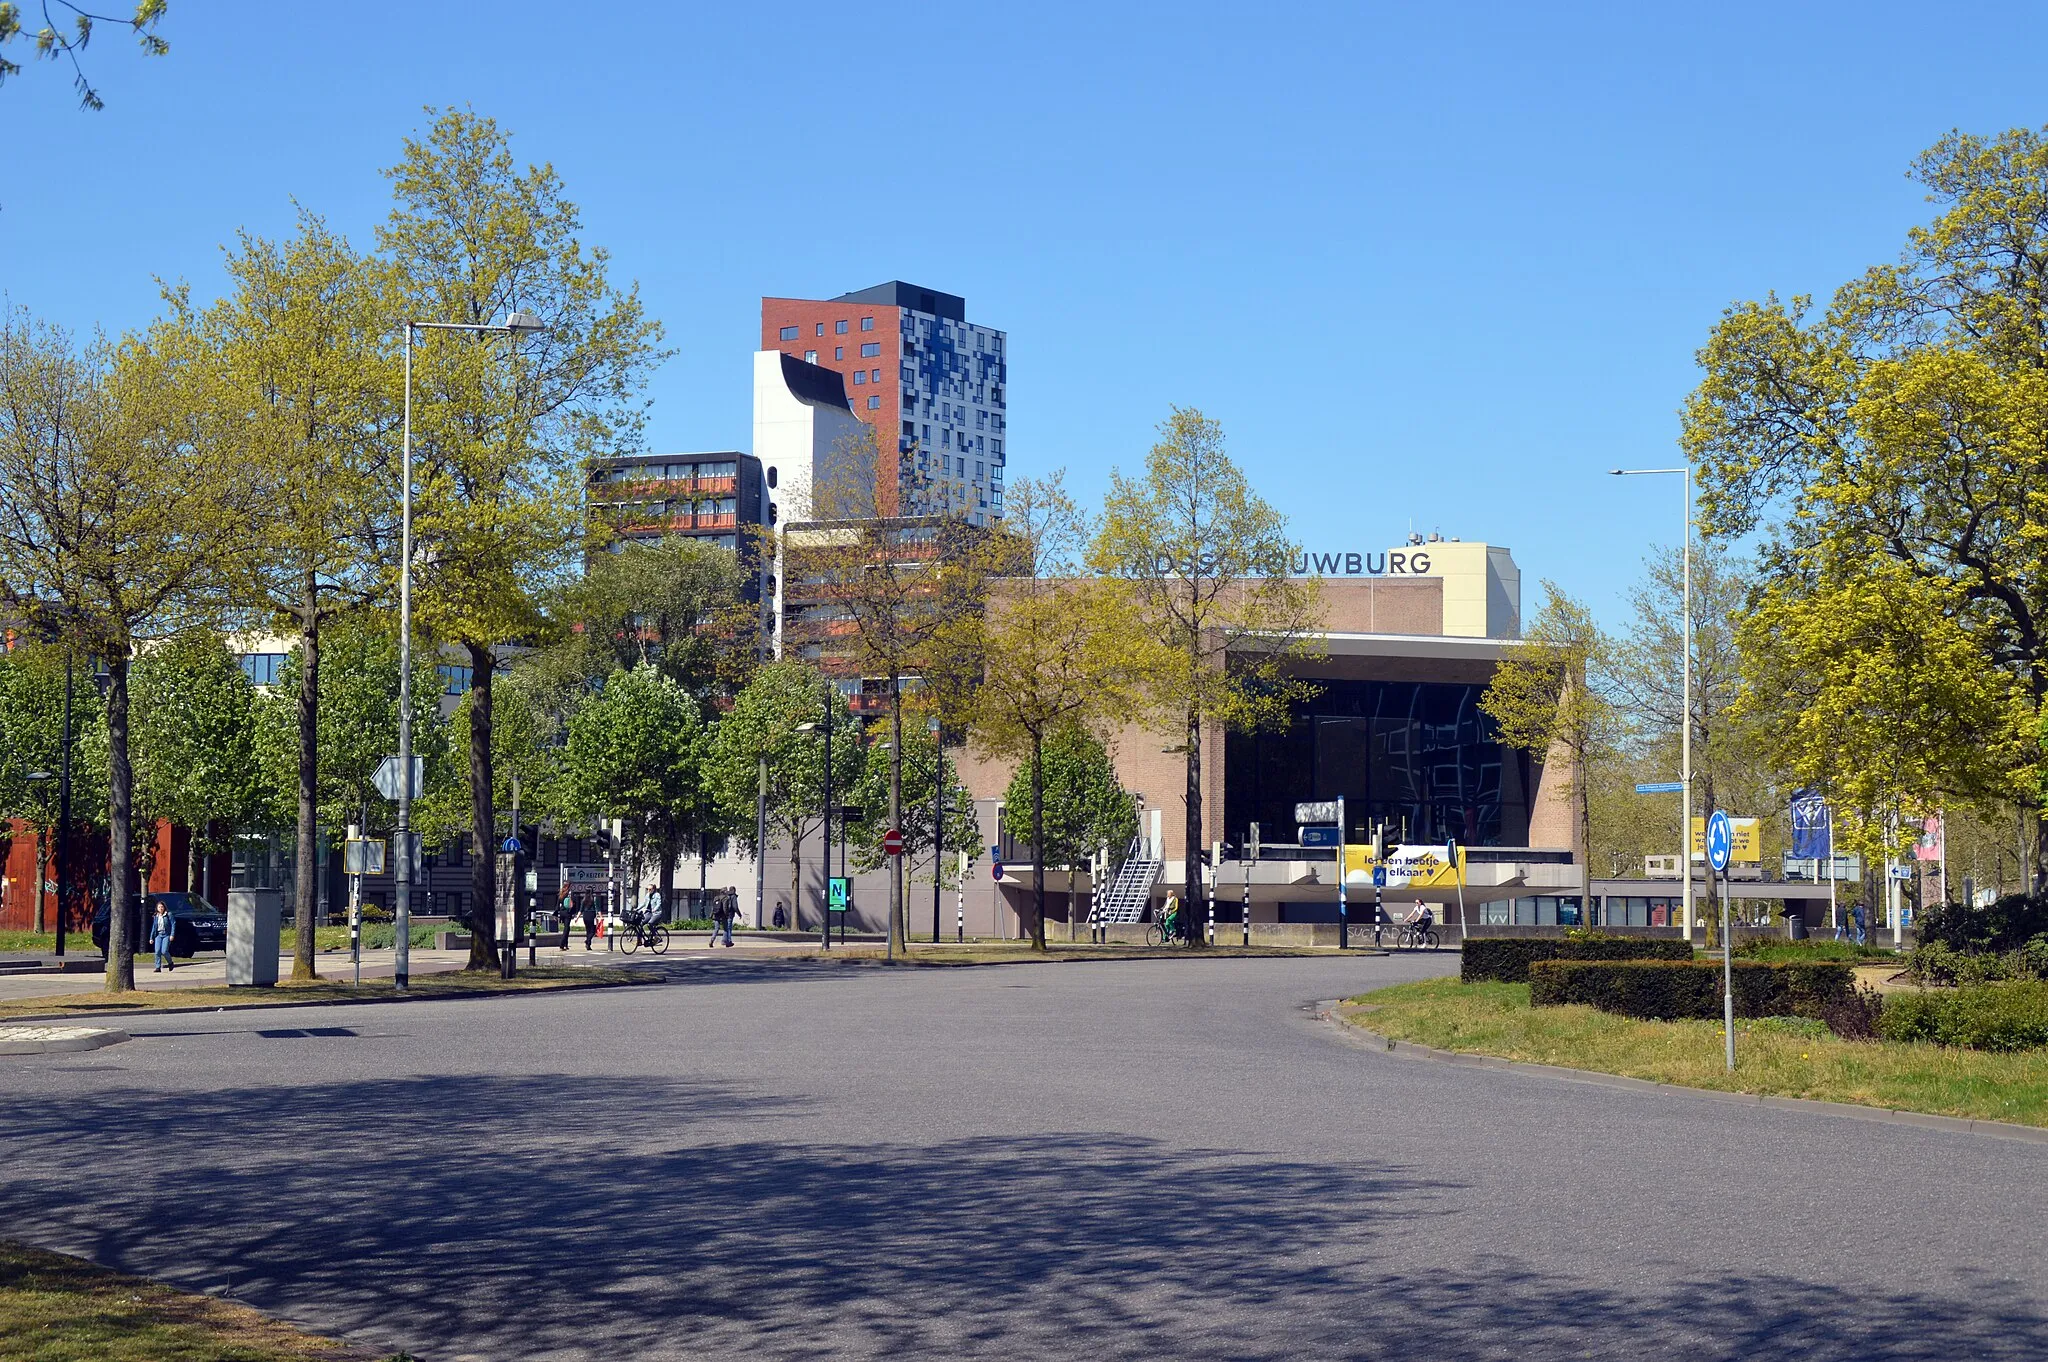 Photo showing: The Keizer Karelplein, with the theater Nijmegen in the background